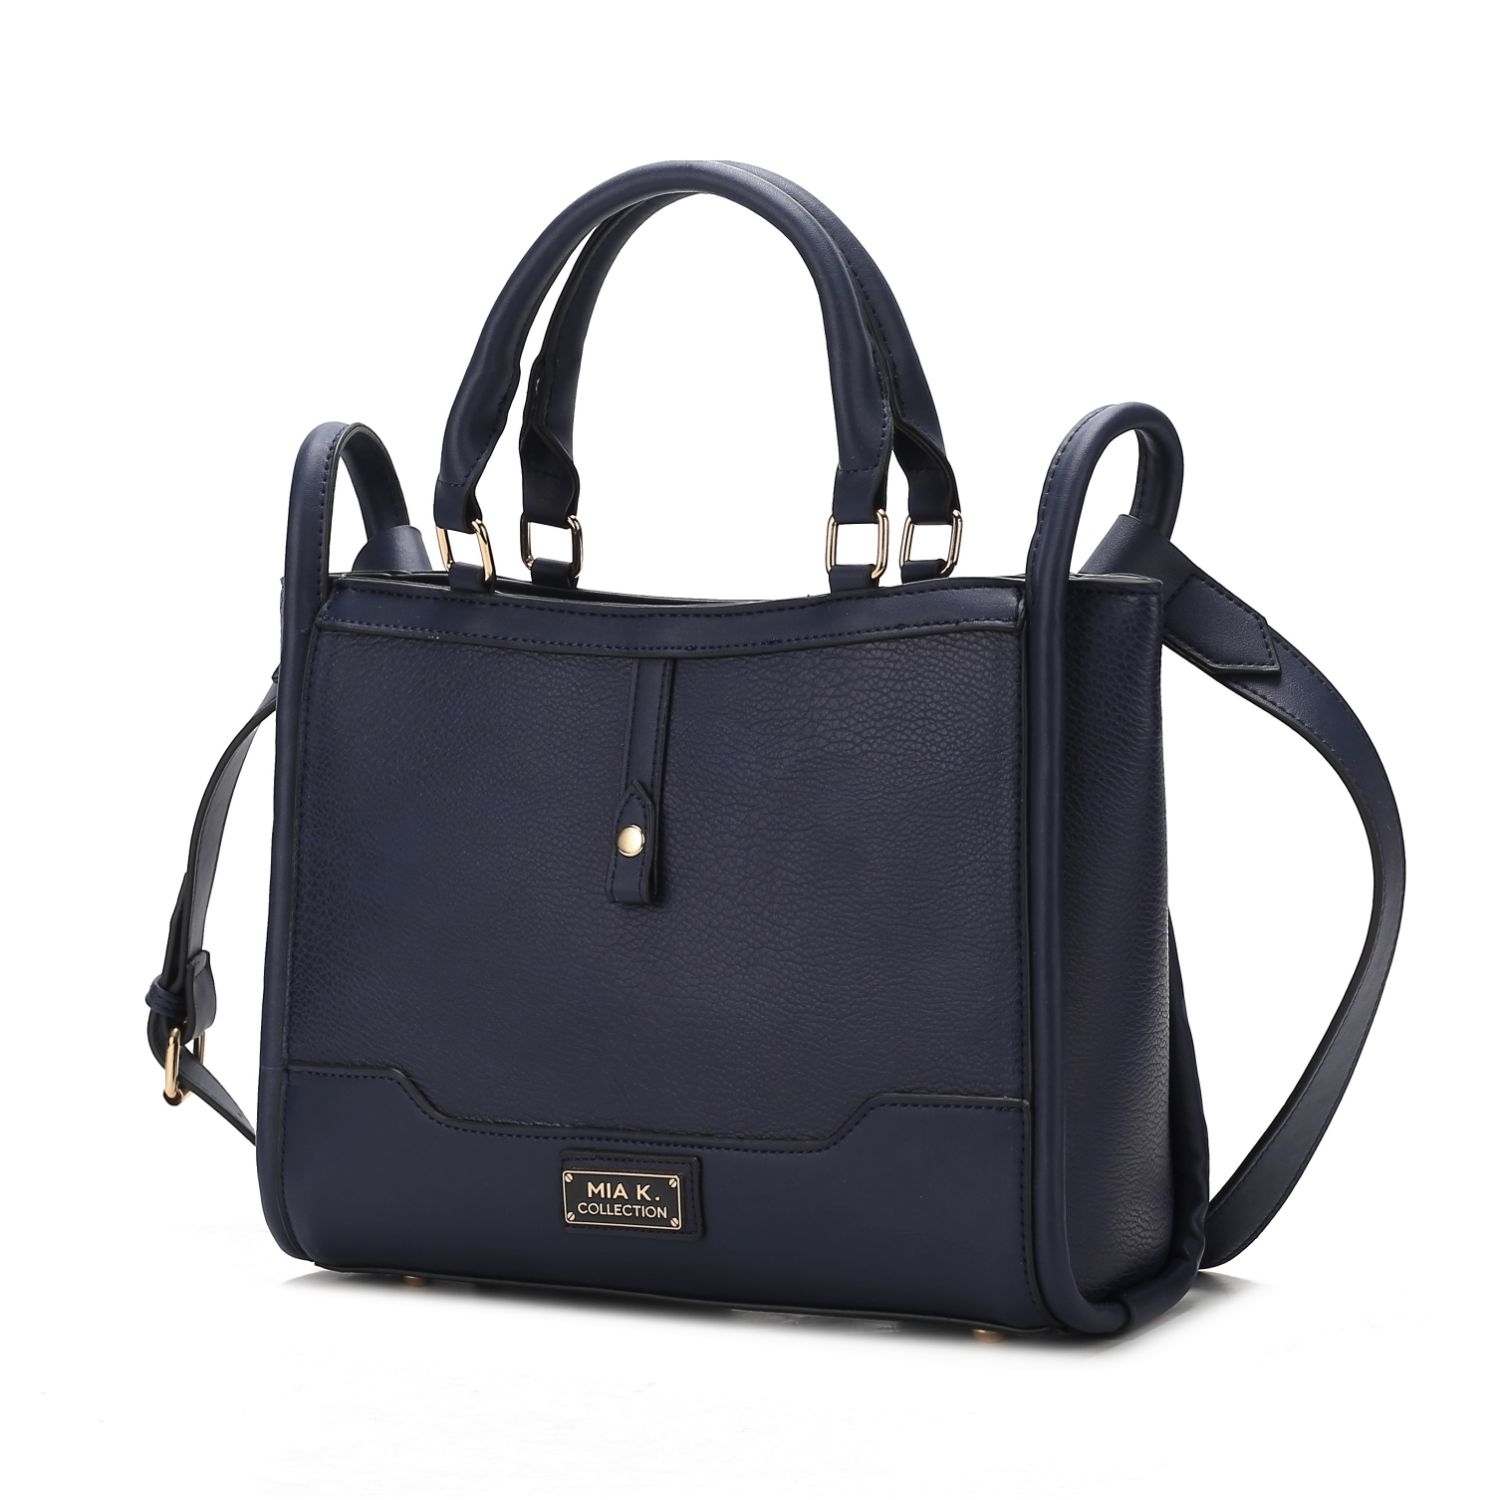 MKF Collection Melody Vegan Leather Tote By Mia K - Navy